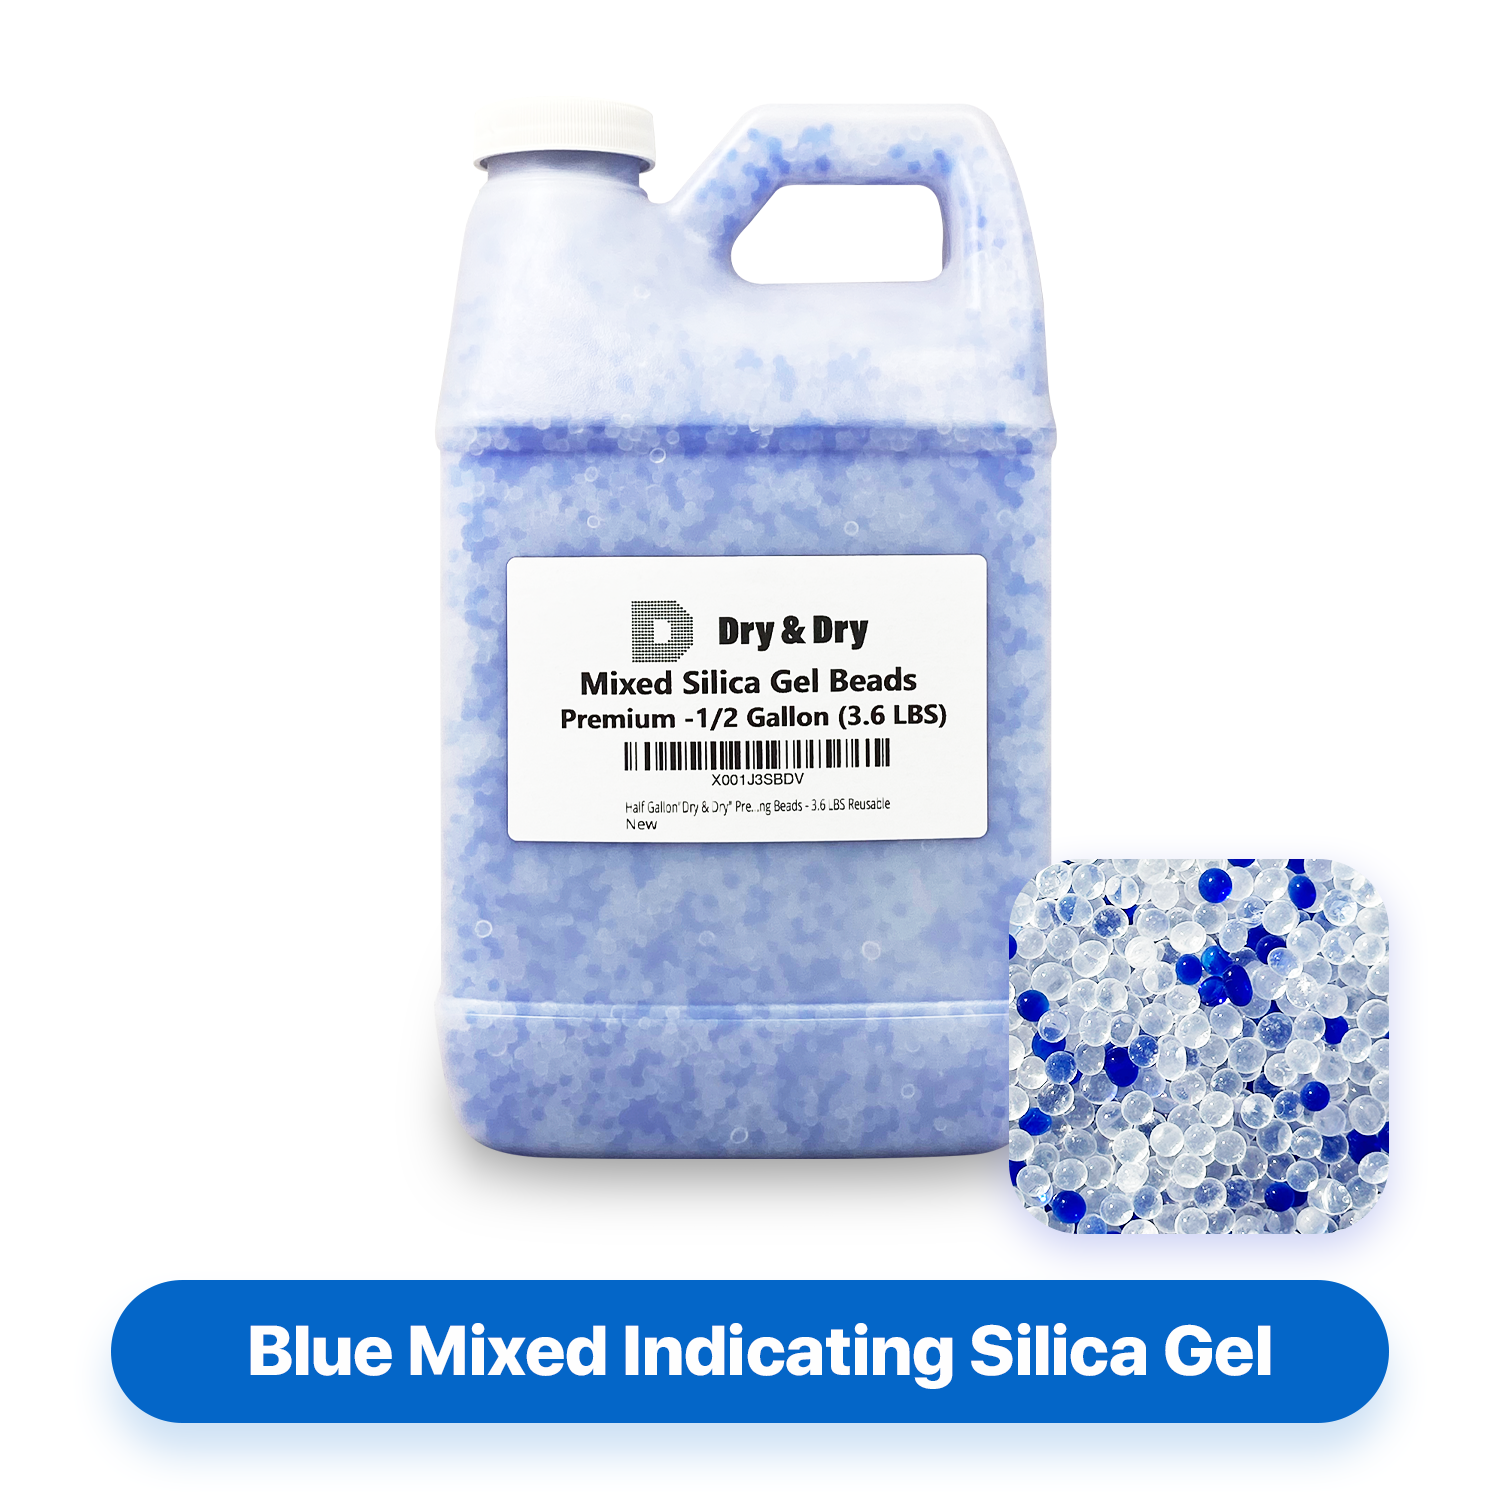 1/2 Gallon Premium Blue & White Mixed Indicating Silica Gel Beads(Industry Standard 3-5 mm) - 3.6 LBS Reusable